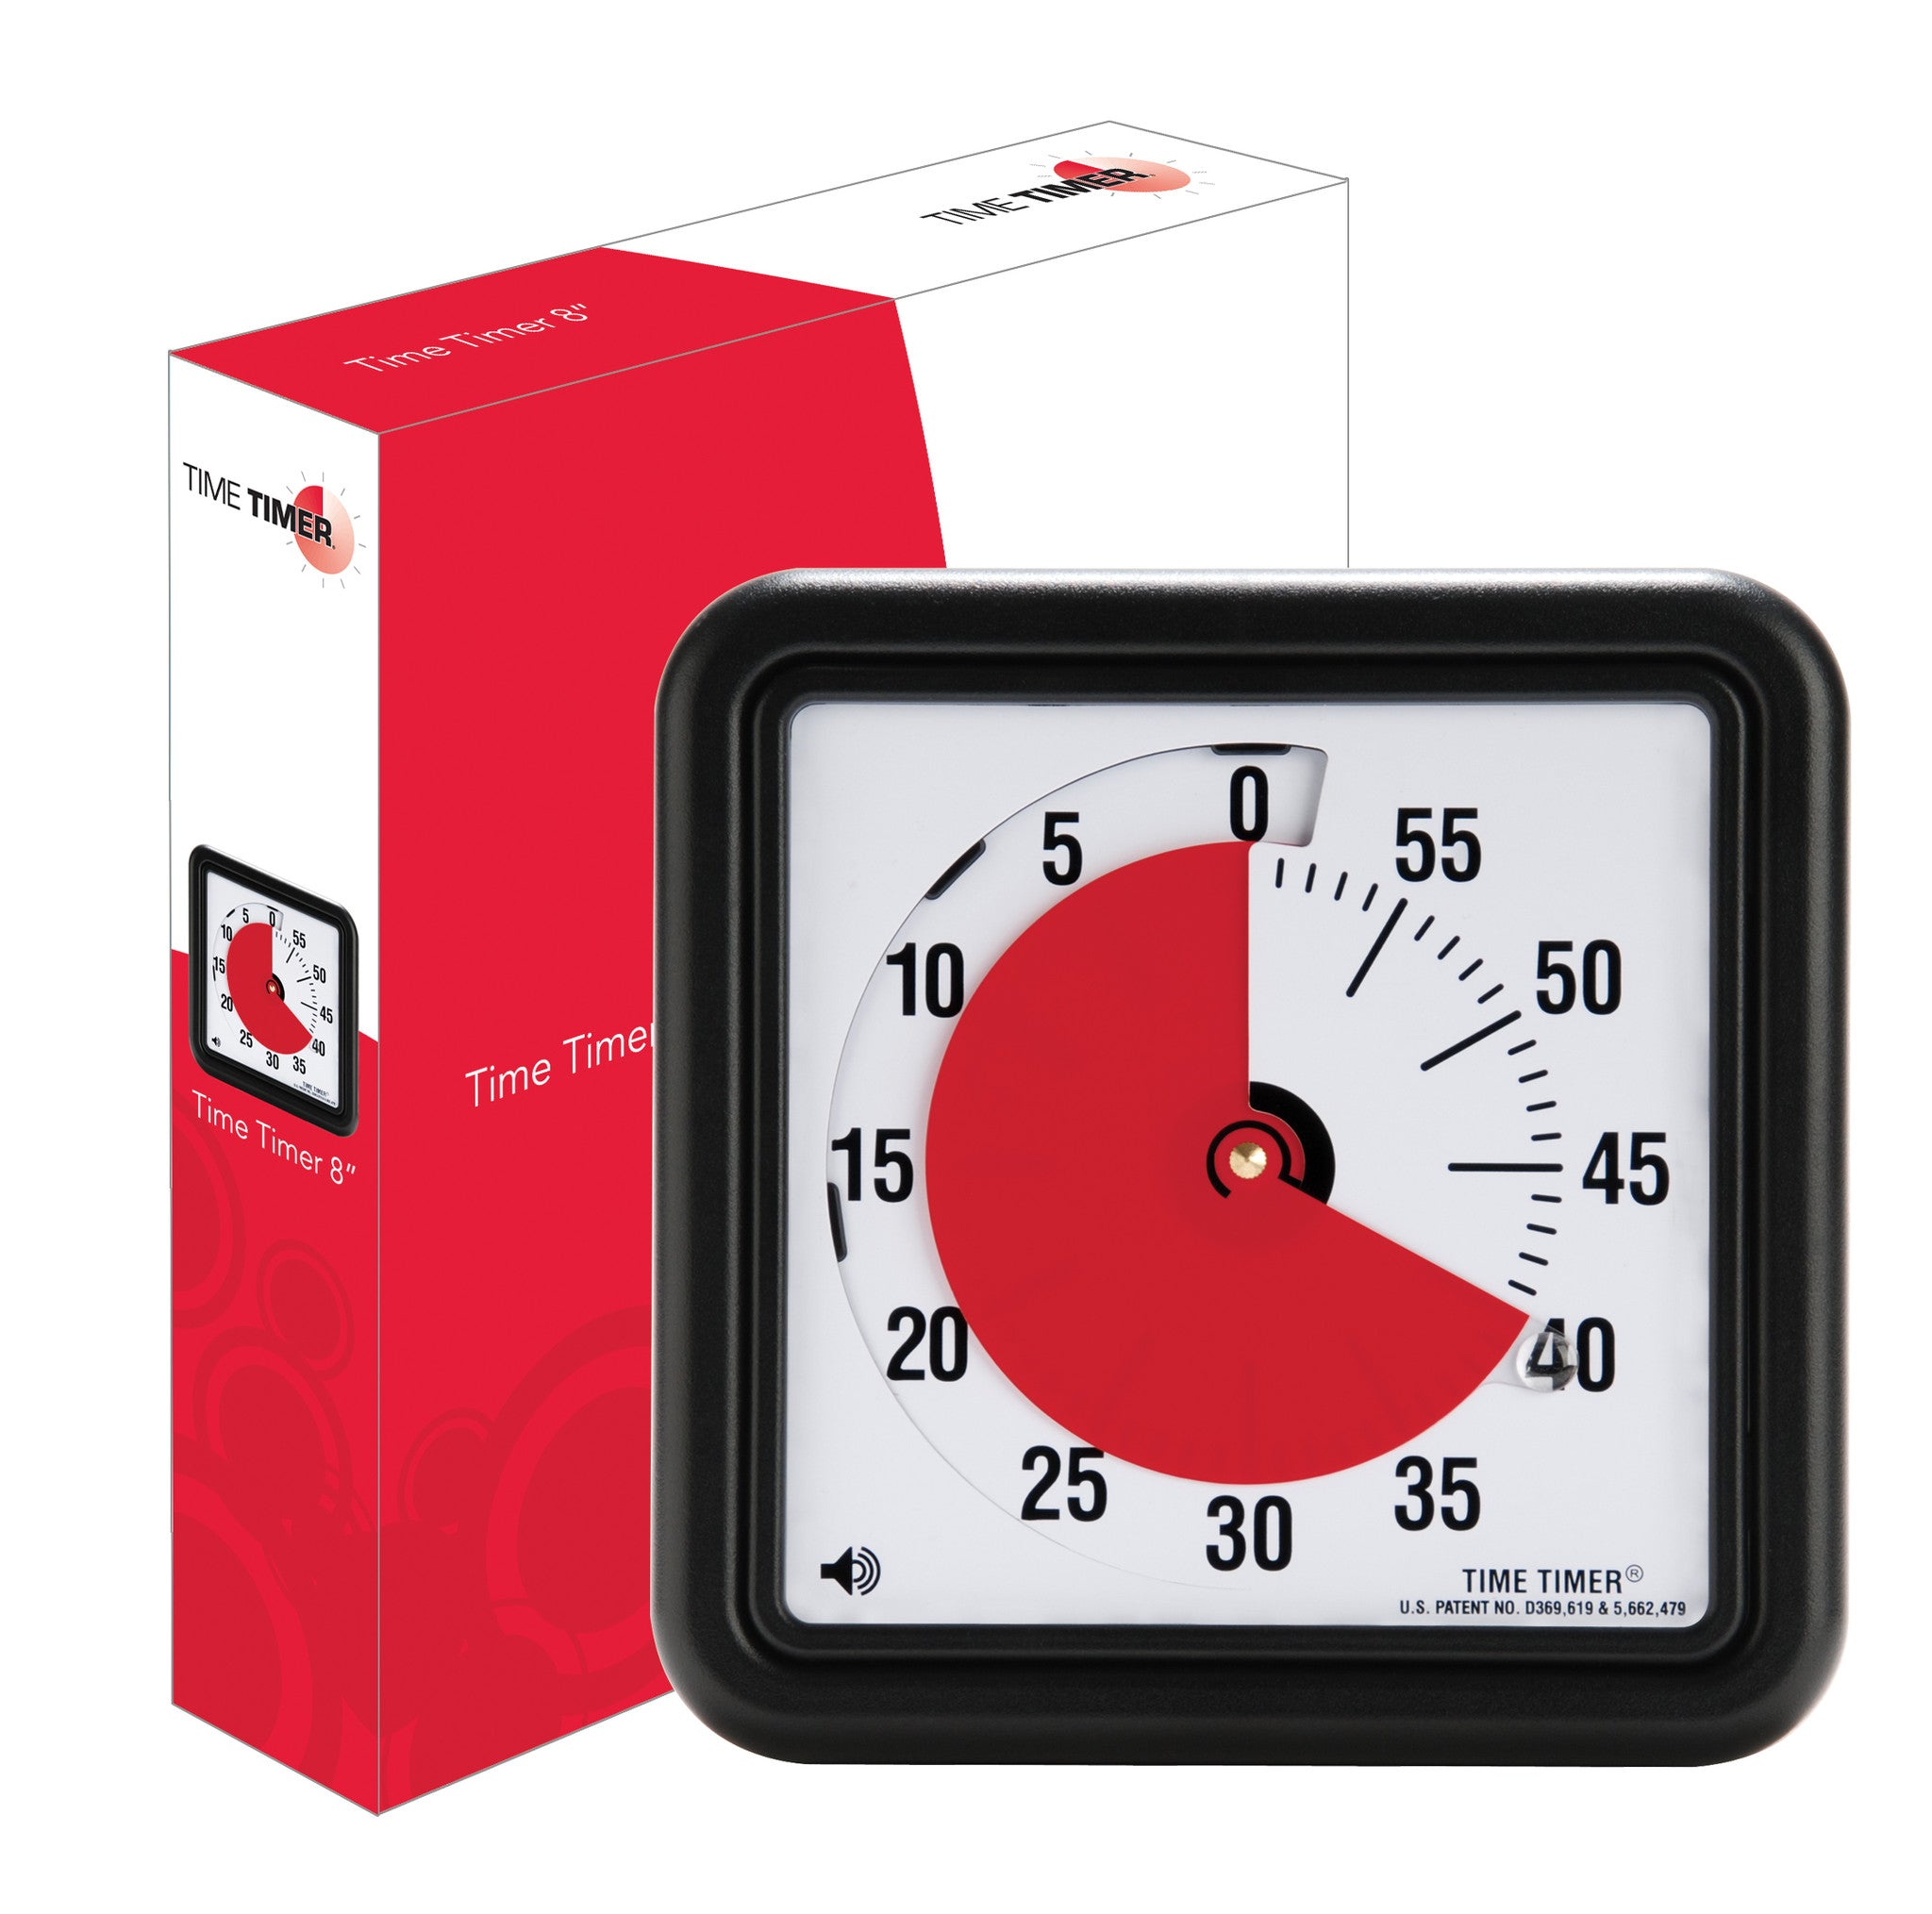 Time Timer 8-inch - Classroom Set - Assistive Technology